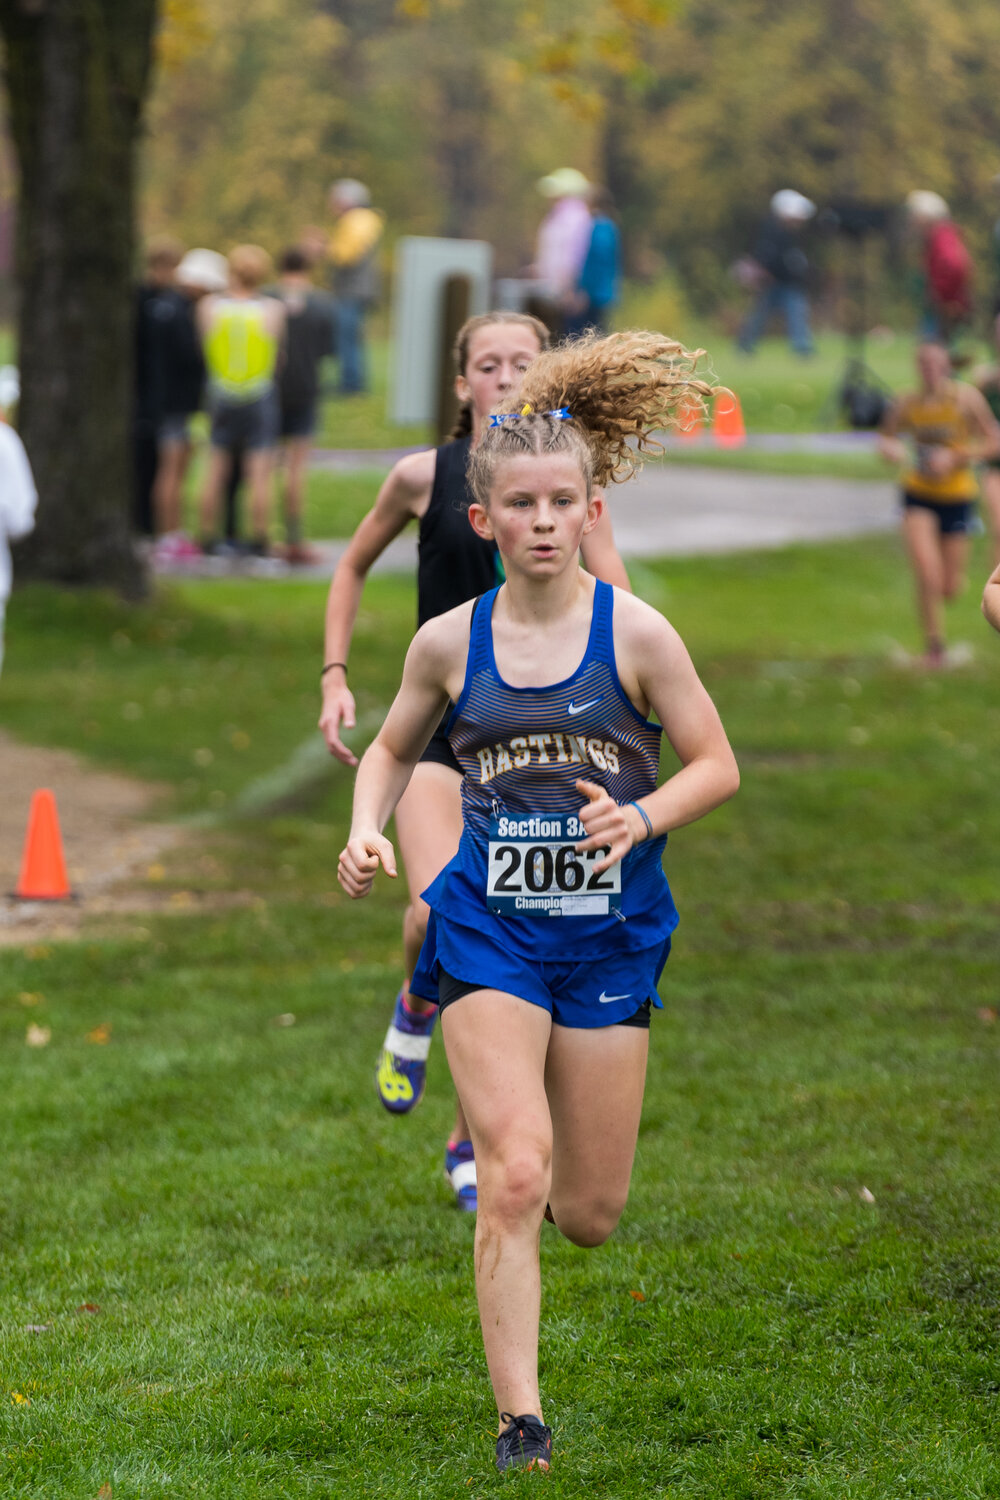 Ivy Brandenburg crushed her personal record and ended up placing 15th overall at the Section 3AAA girls meet with a time of 20:32.40. That time was less than 20 seconds from qualifying for State.